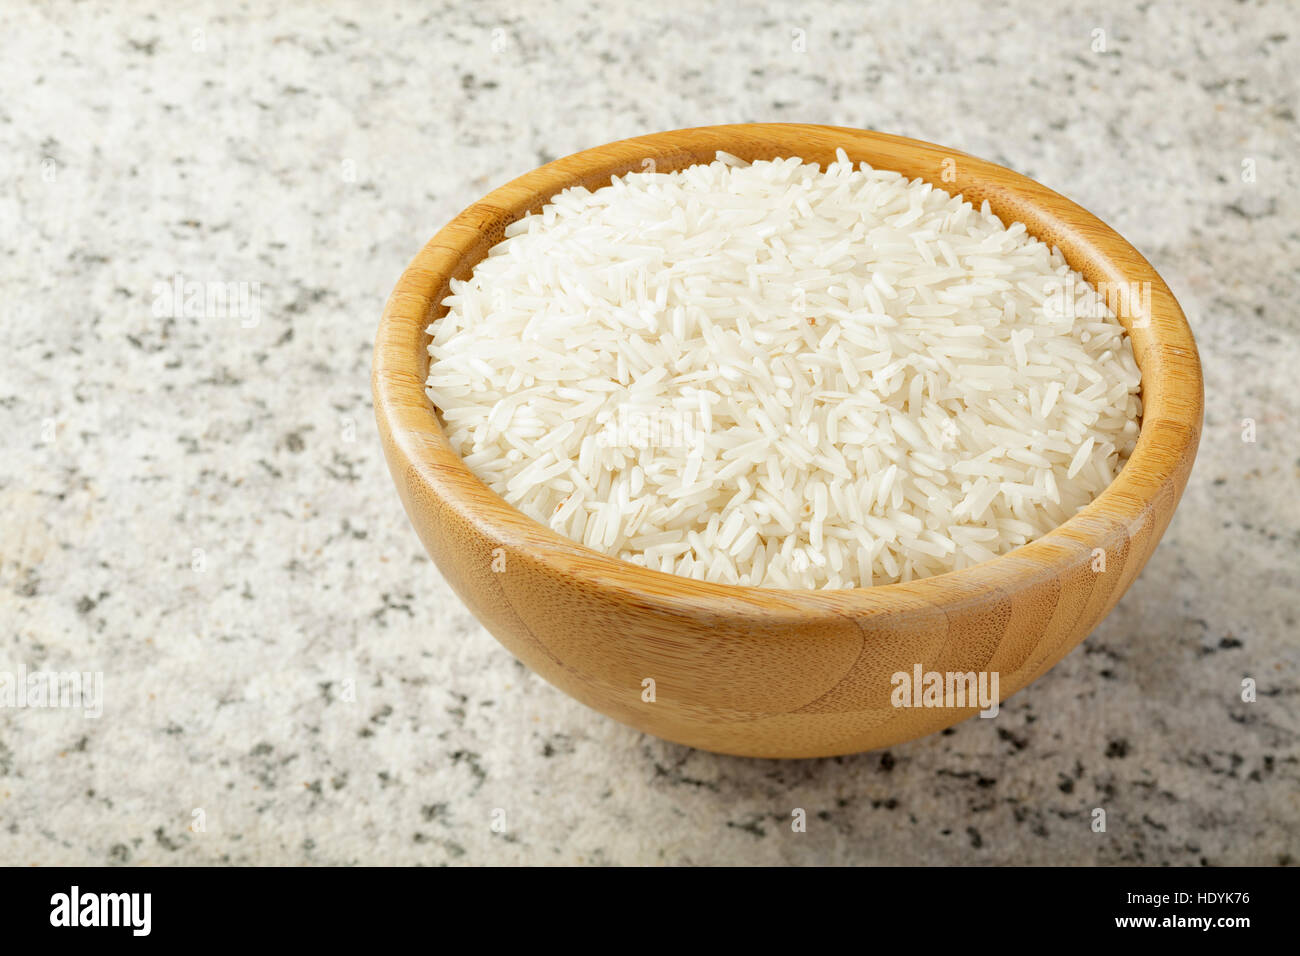 White rice in a wooden bowl Stock Photo